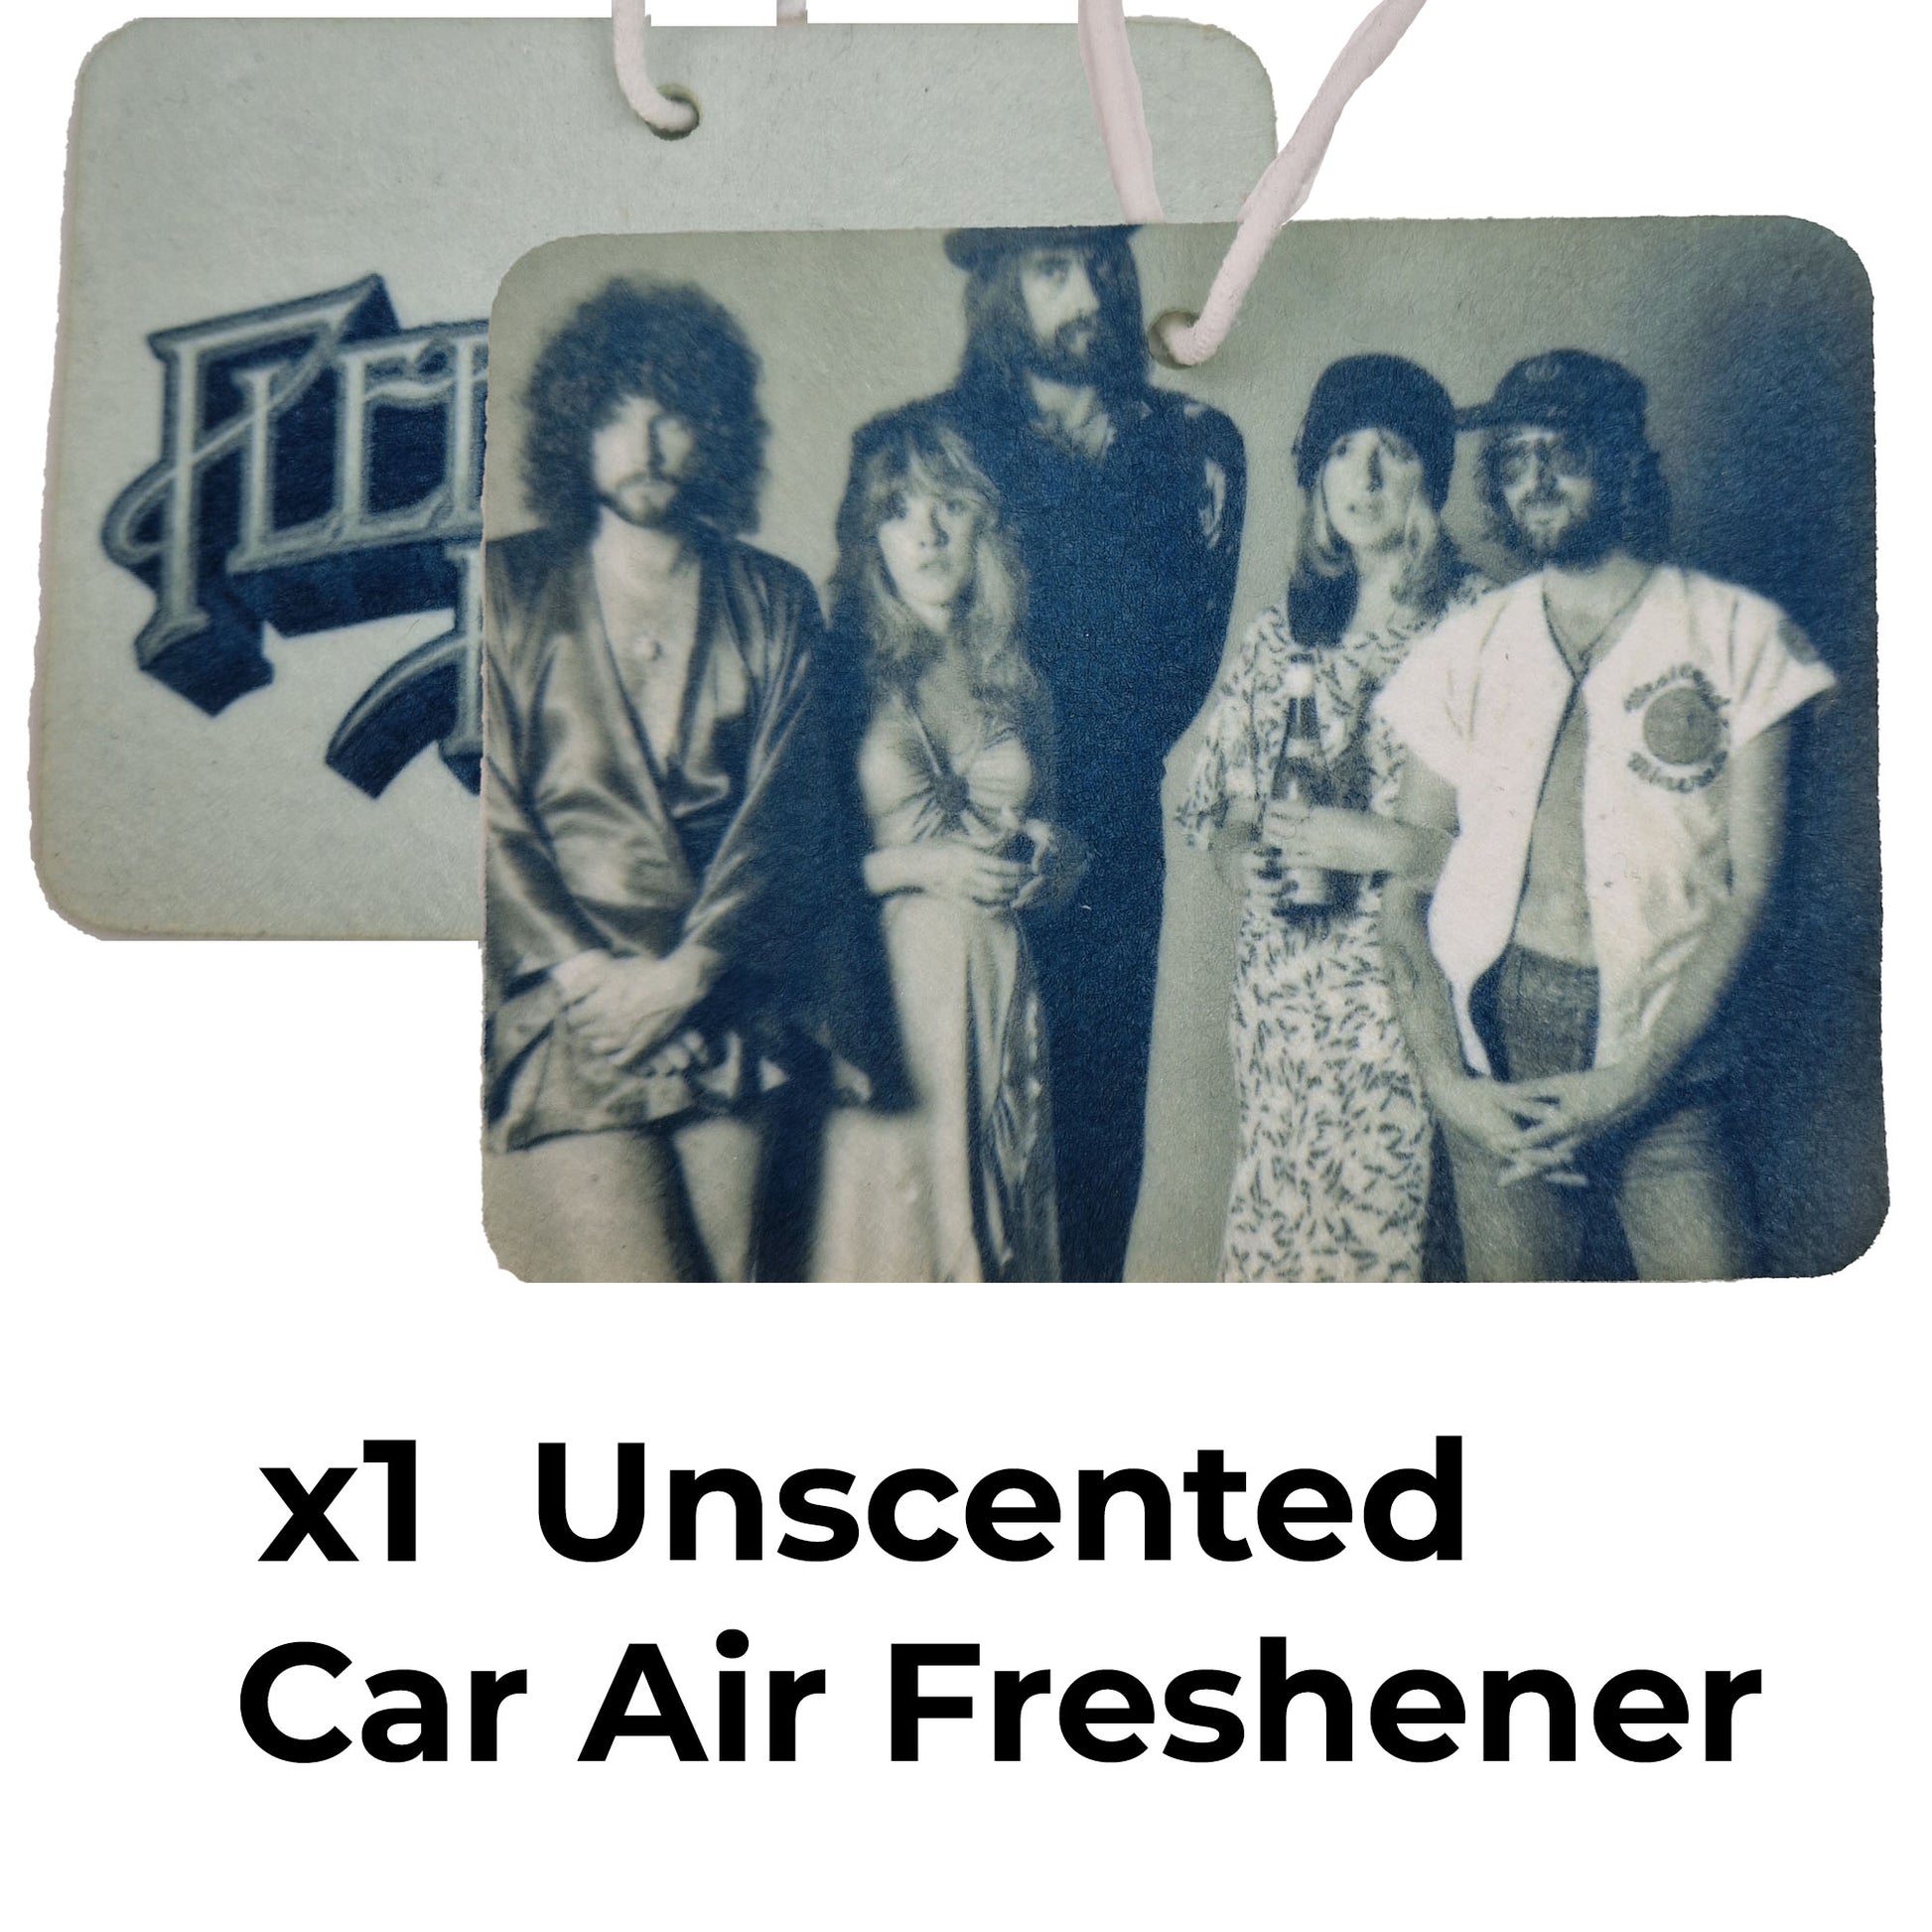 double-sided-print-picture-air-freshener-for-cars-fleetwood-mac-group-image-and-logo